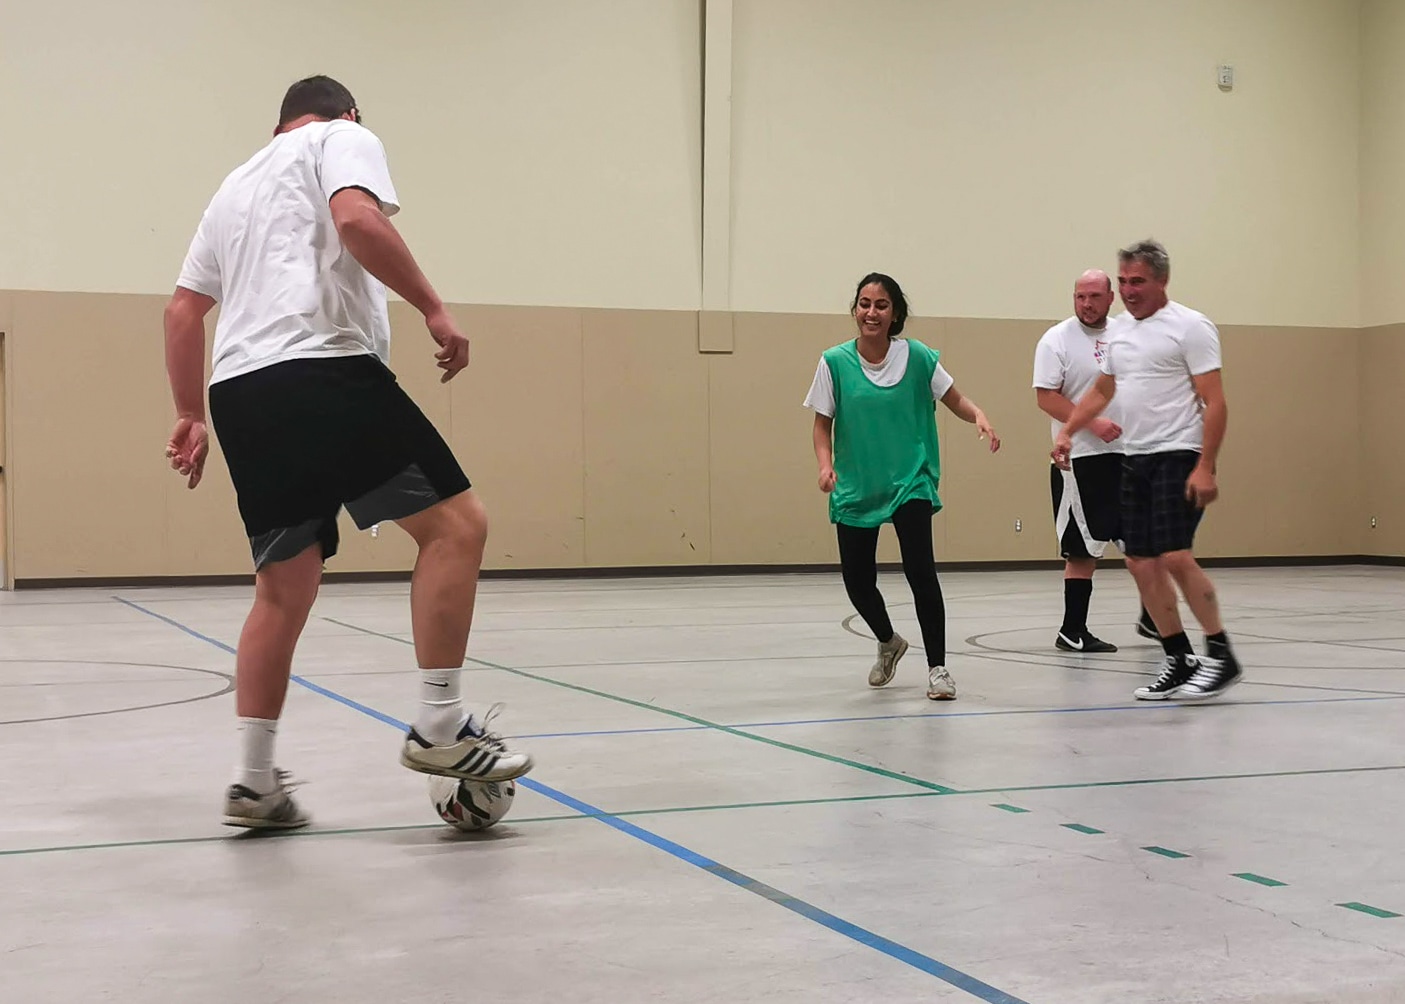 Adults playing soccer. Three men in white T-shirts and one woman wearing a green bib.